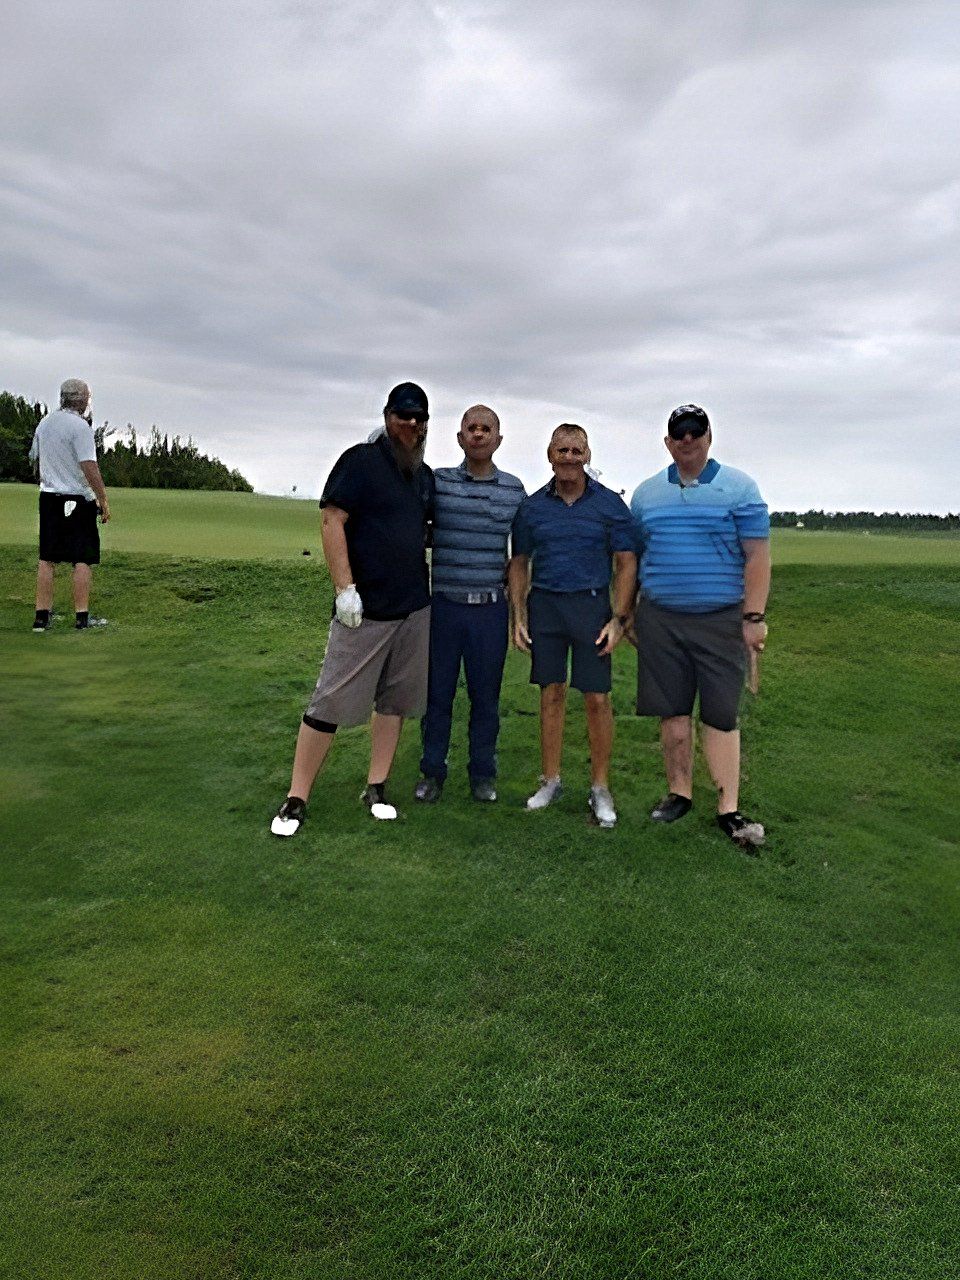 a group of men are posing for a picture on a golf course .